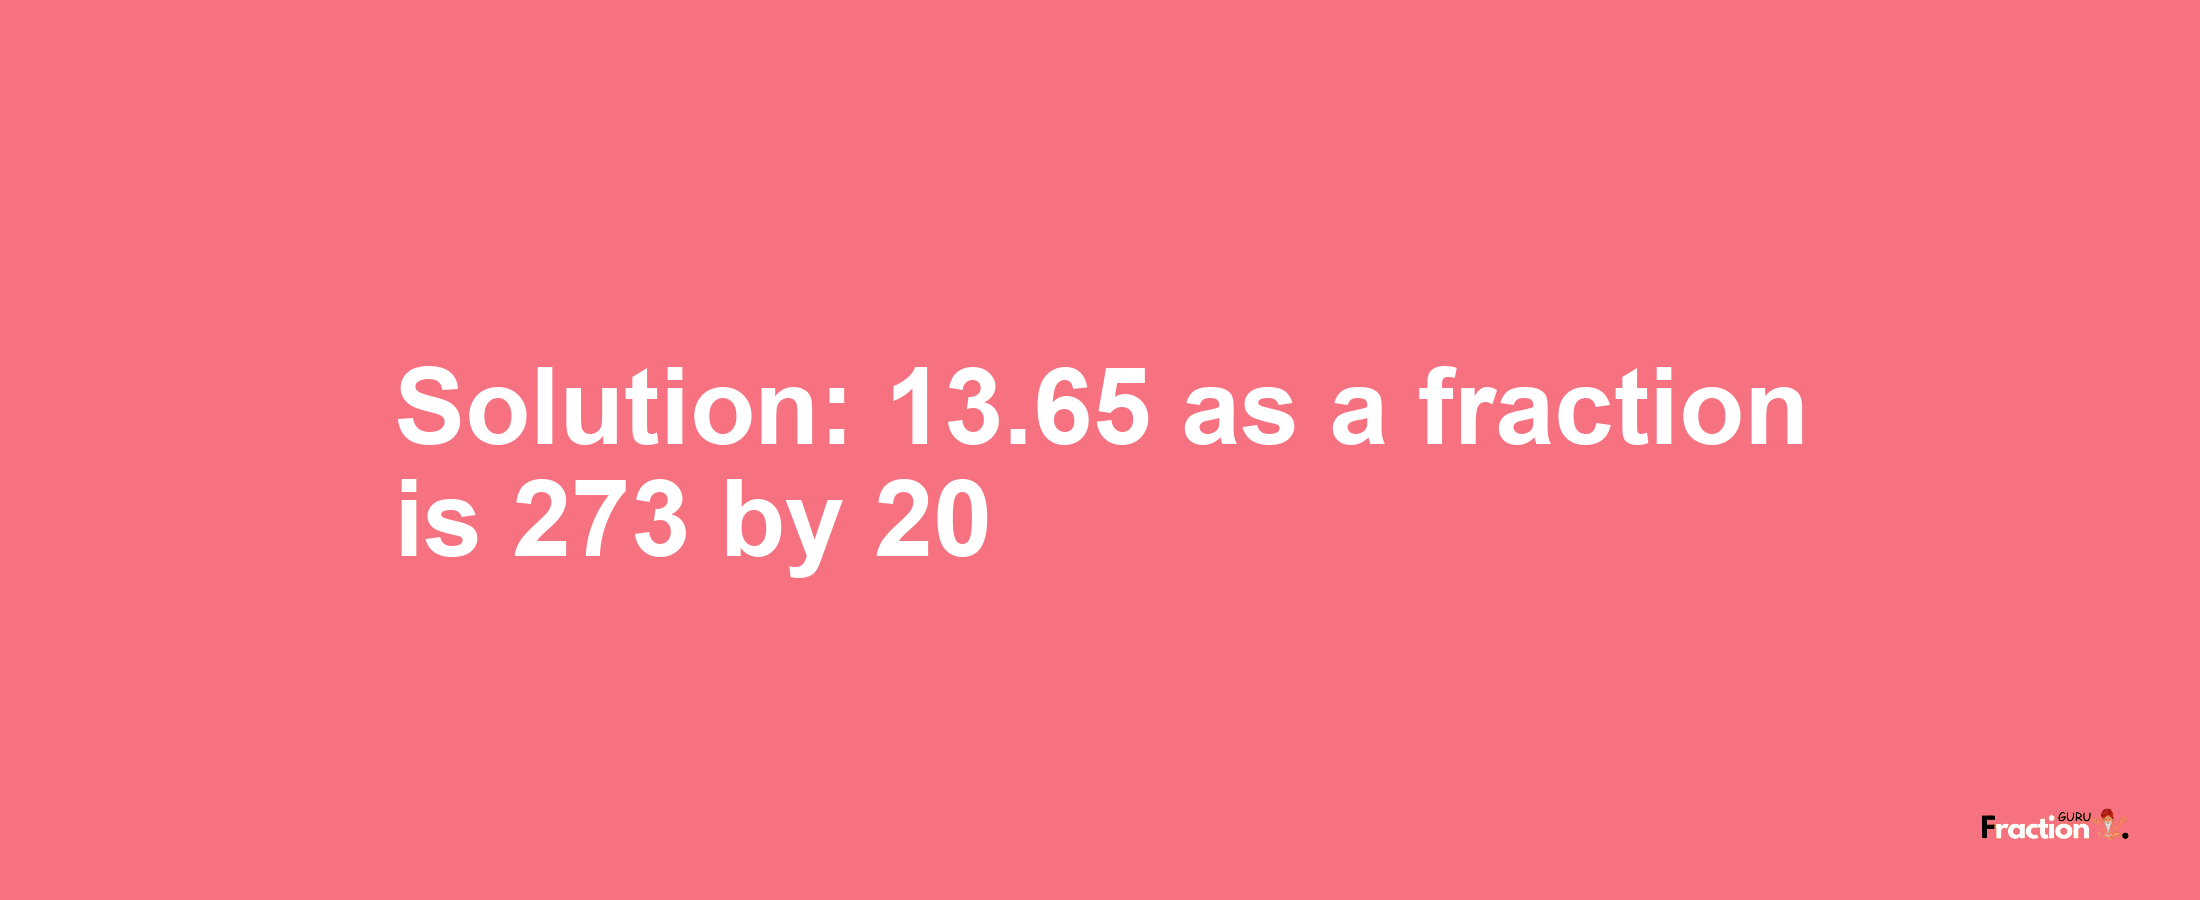 Solution:13.65 as a fraction is 273/20